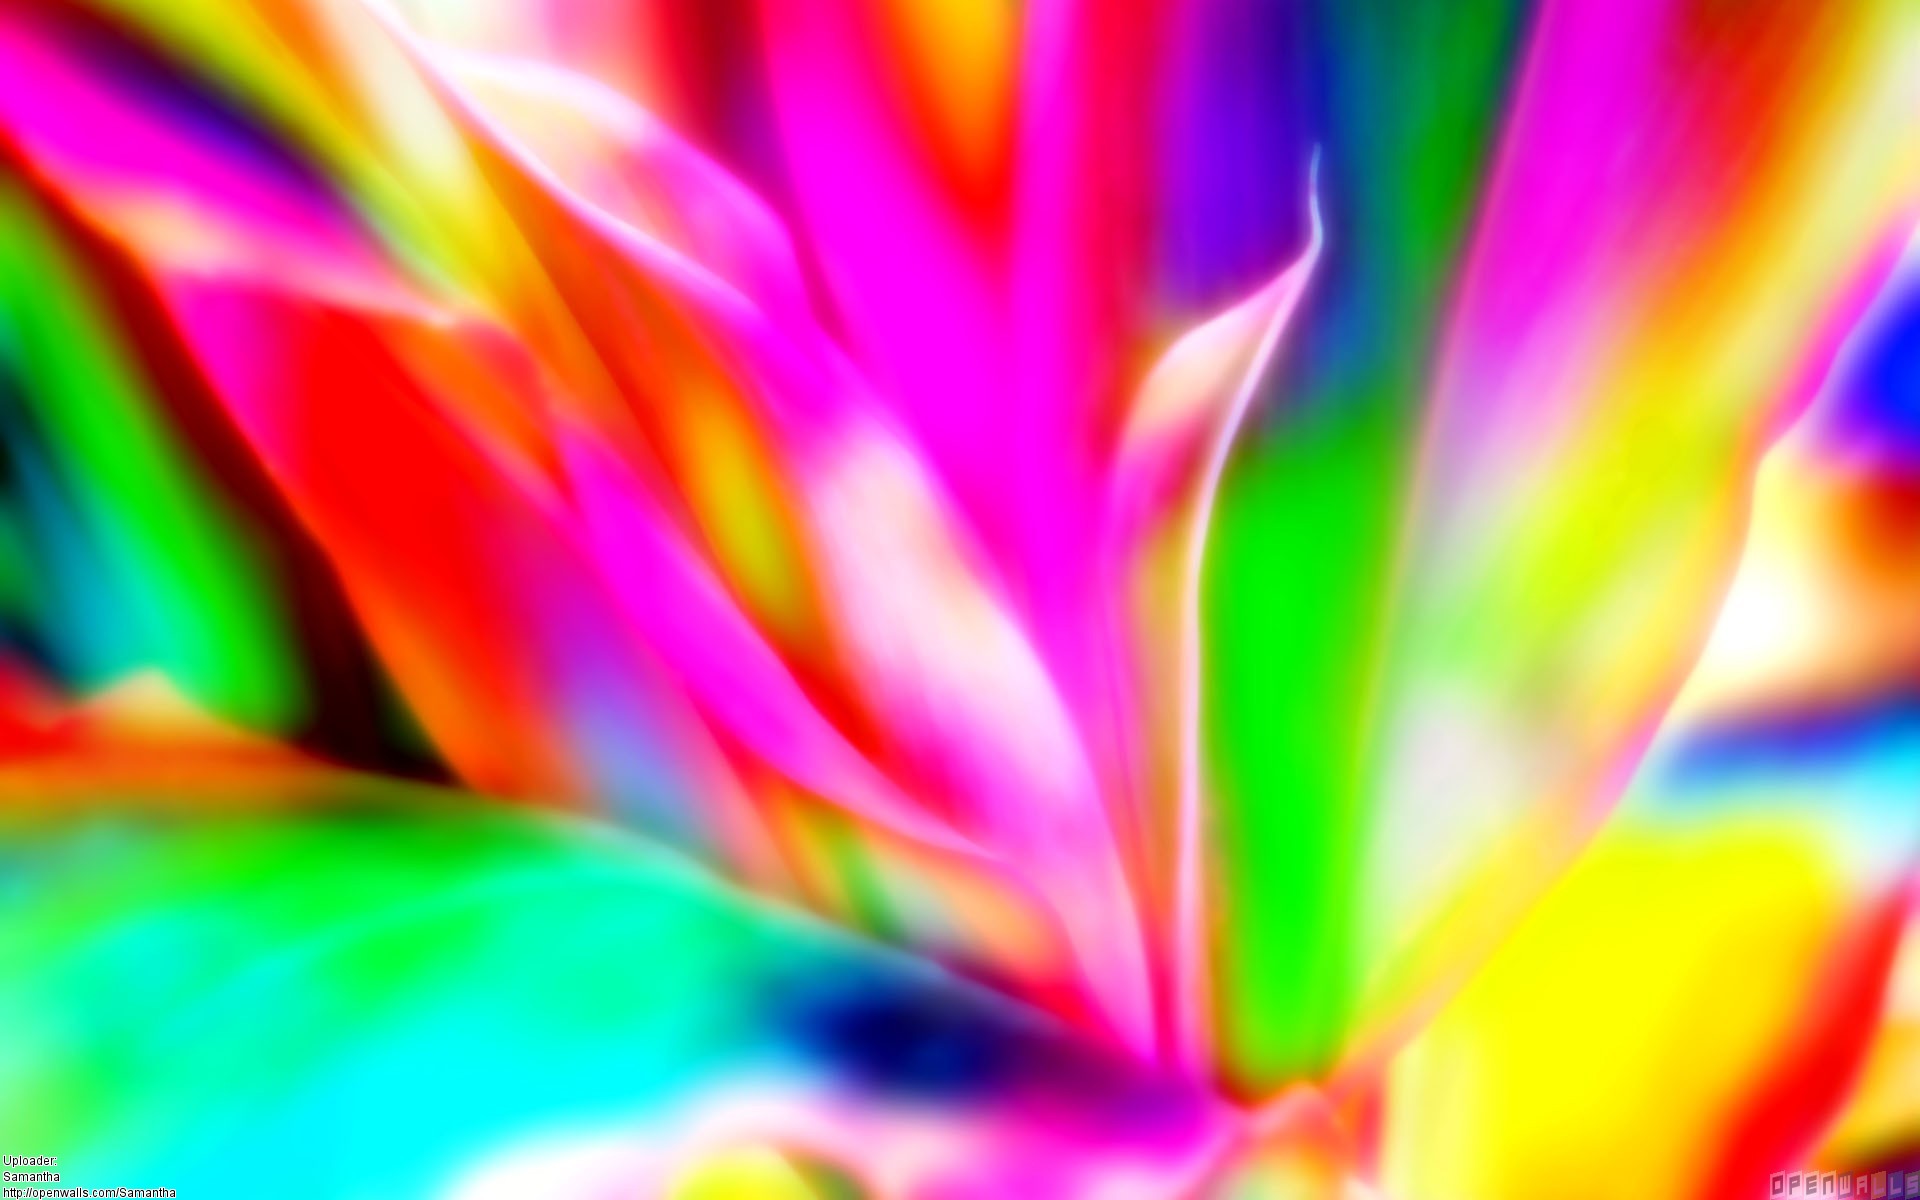 Background Image Colorful Image Wallpaper